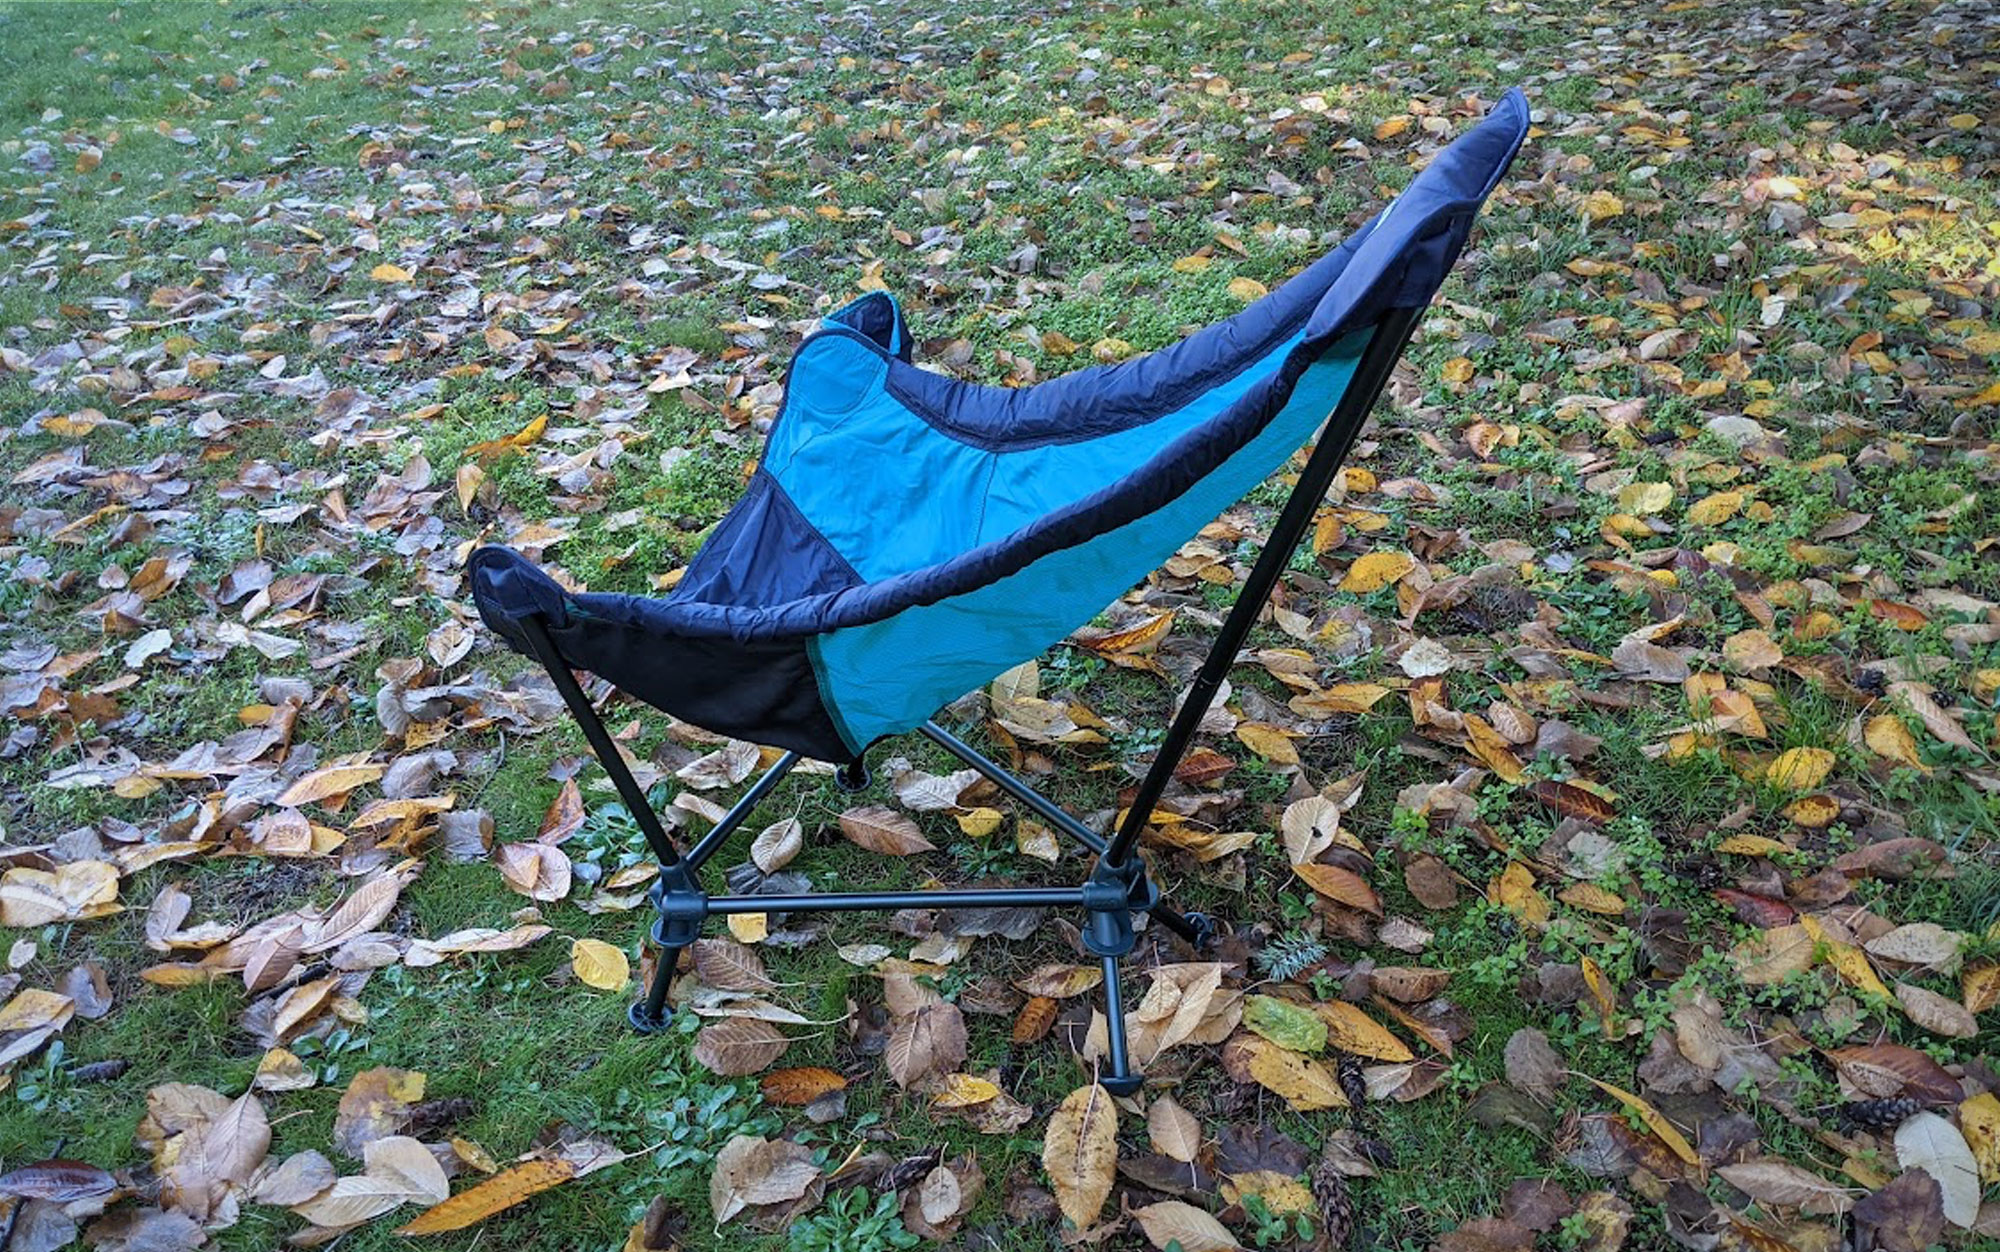 We tested the ENO Lounger DL.